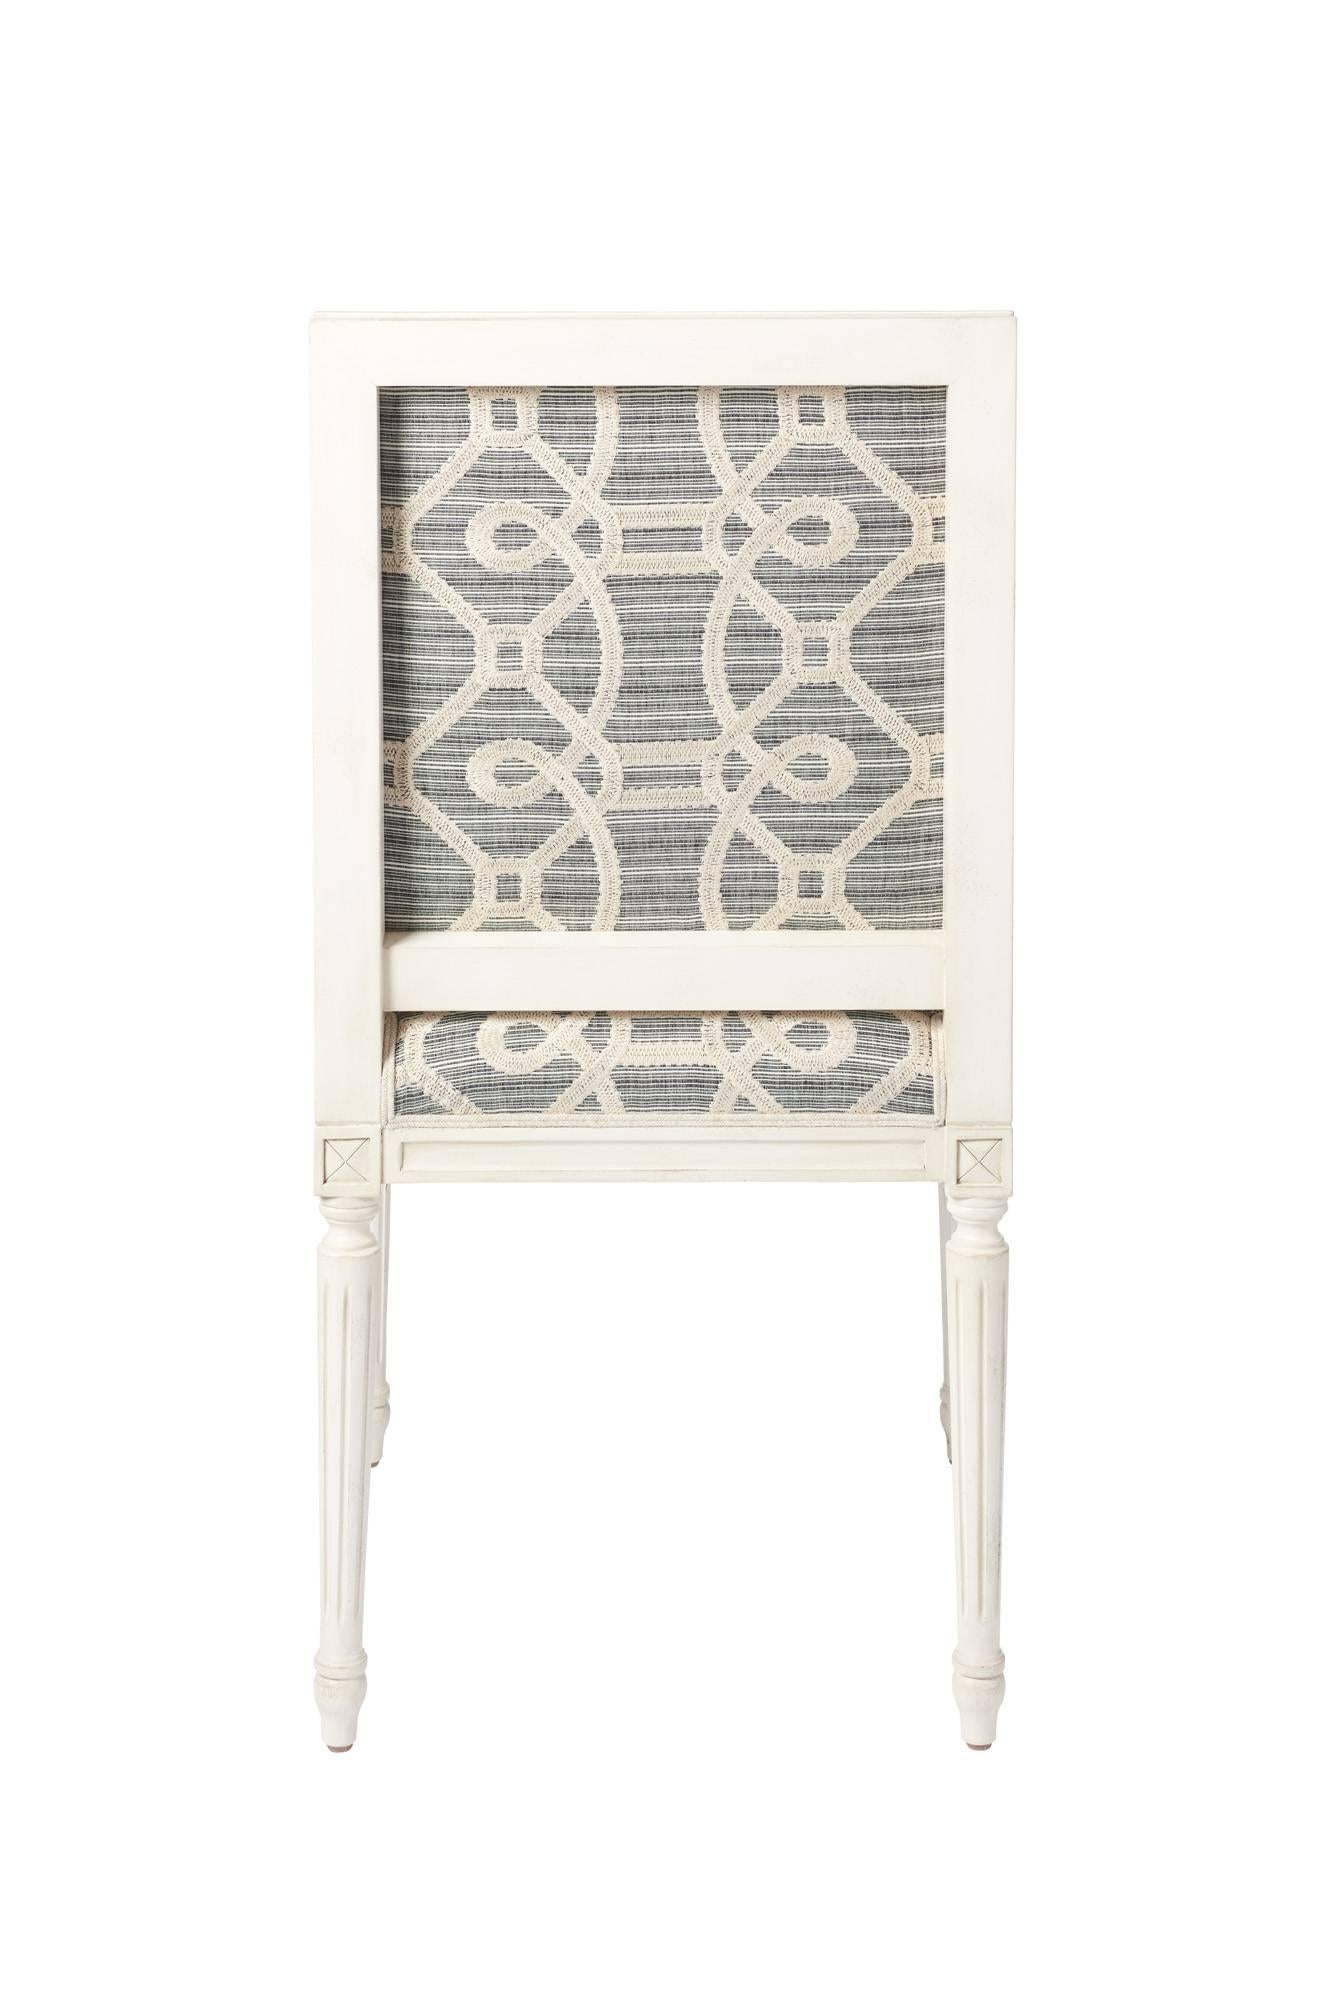 Wood Schumacher Marie Therese Ziz Embroidery Strié Hand-Carved Beechwood Side Chair 